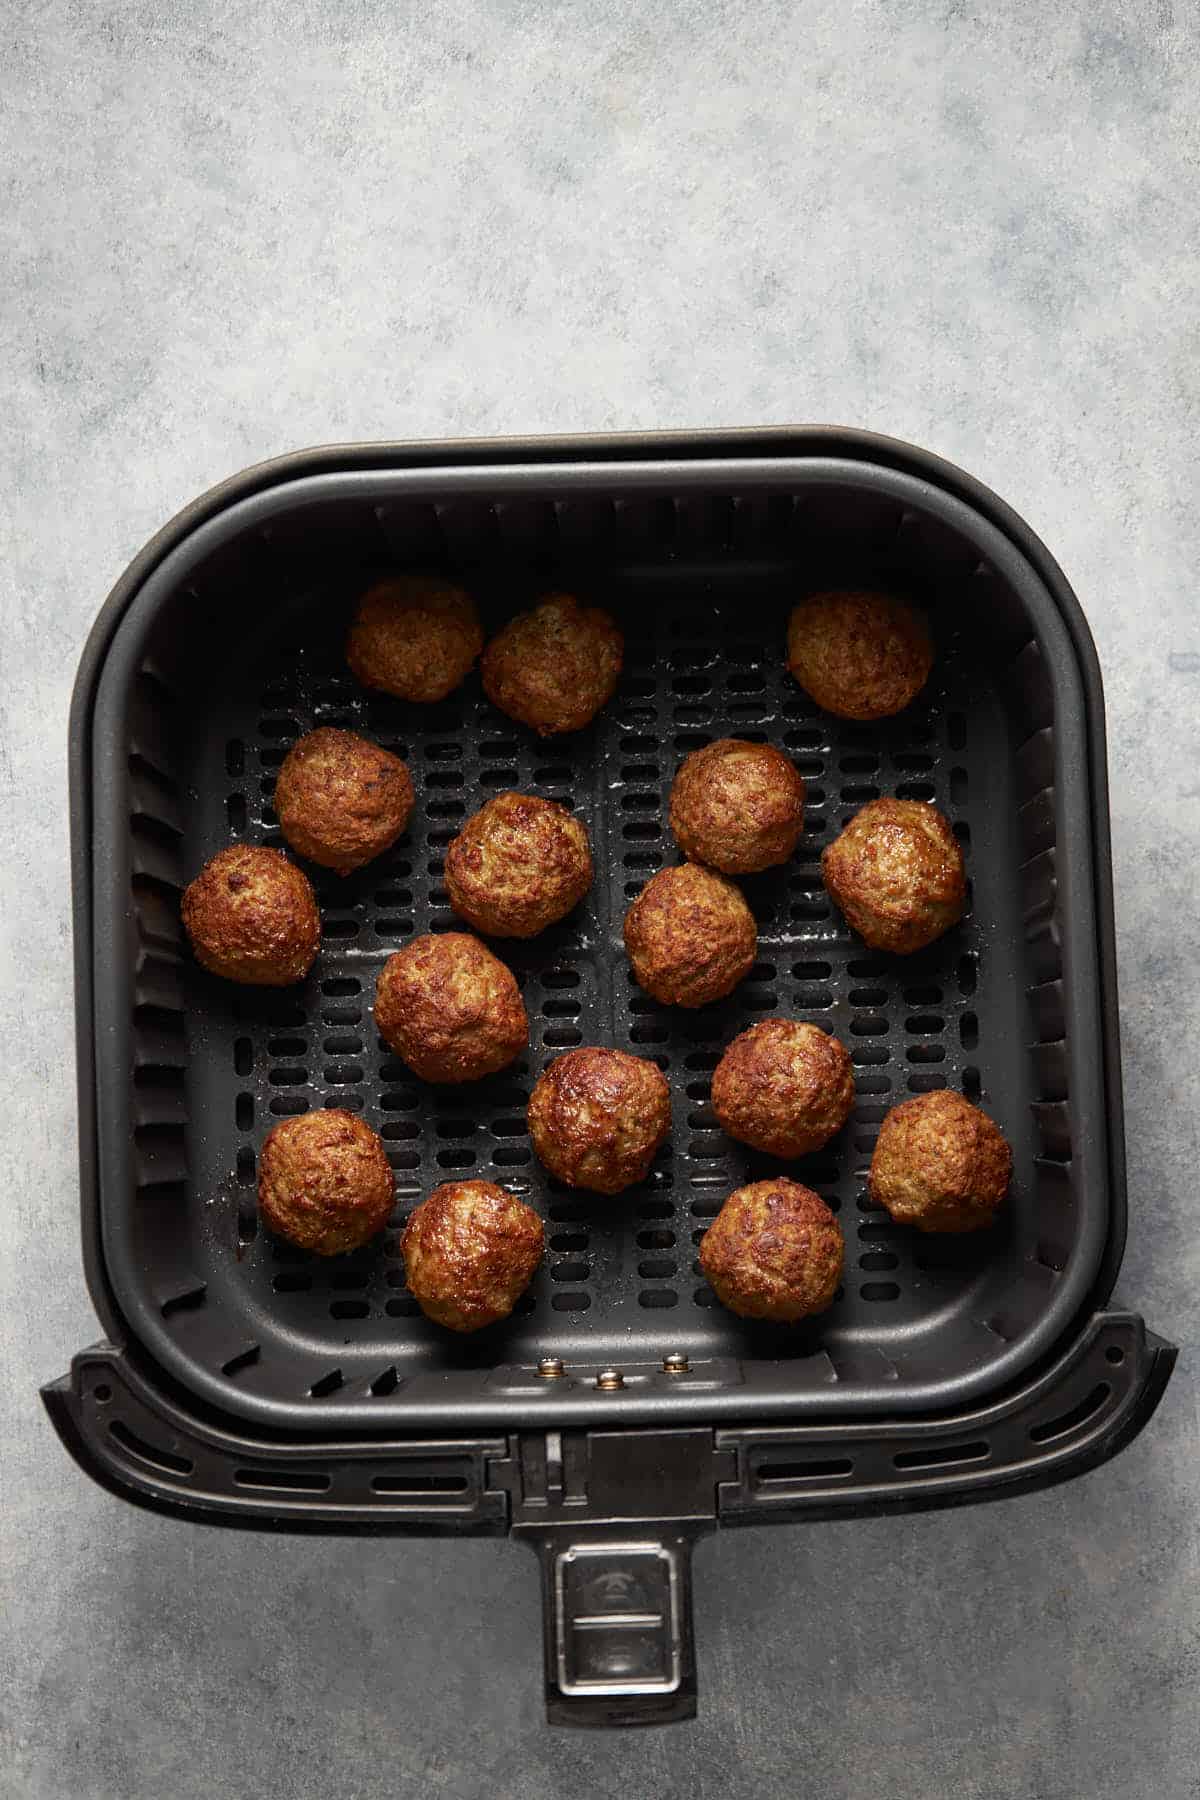 The frozen meatballs in an air fryer basket after cooking.